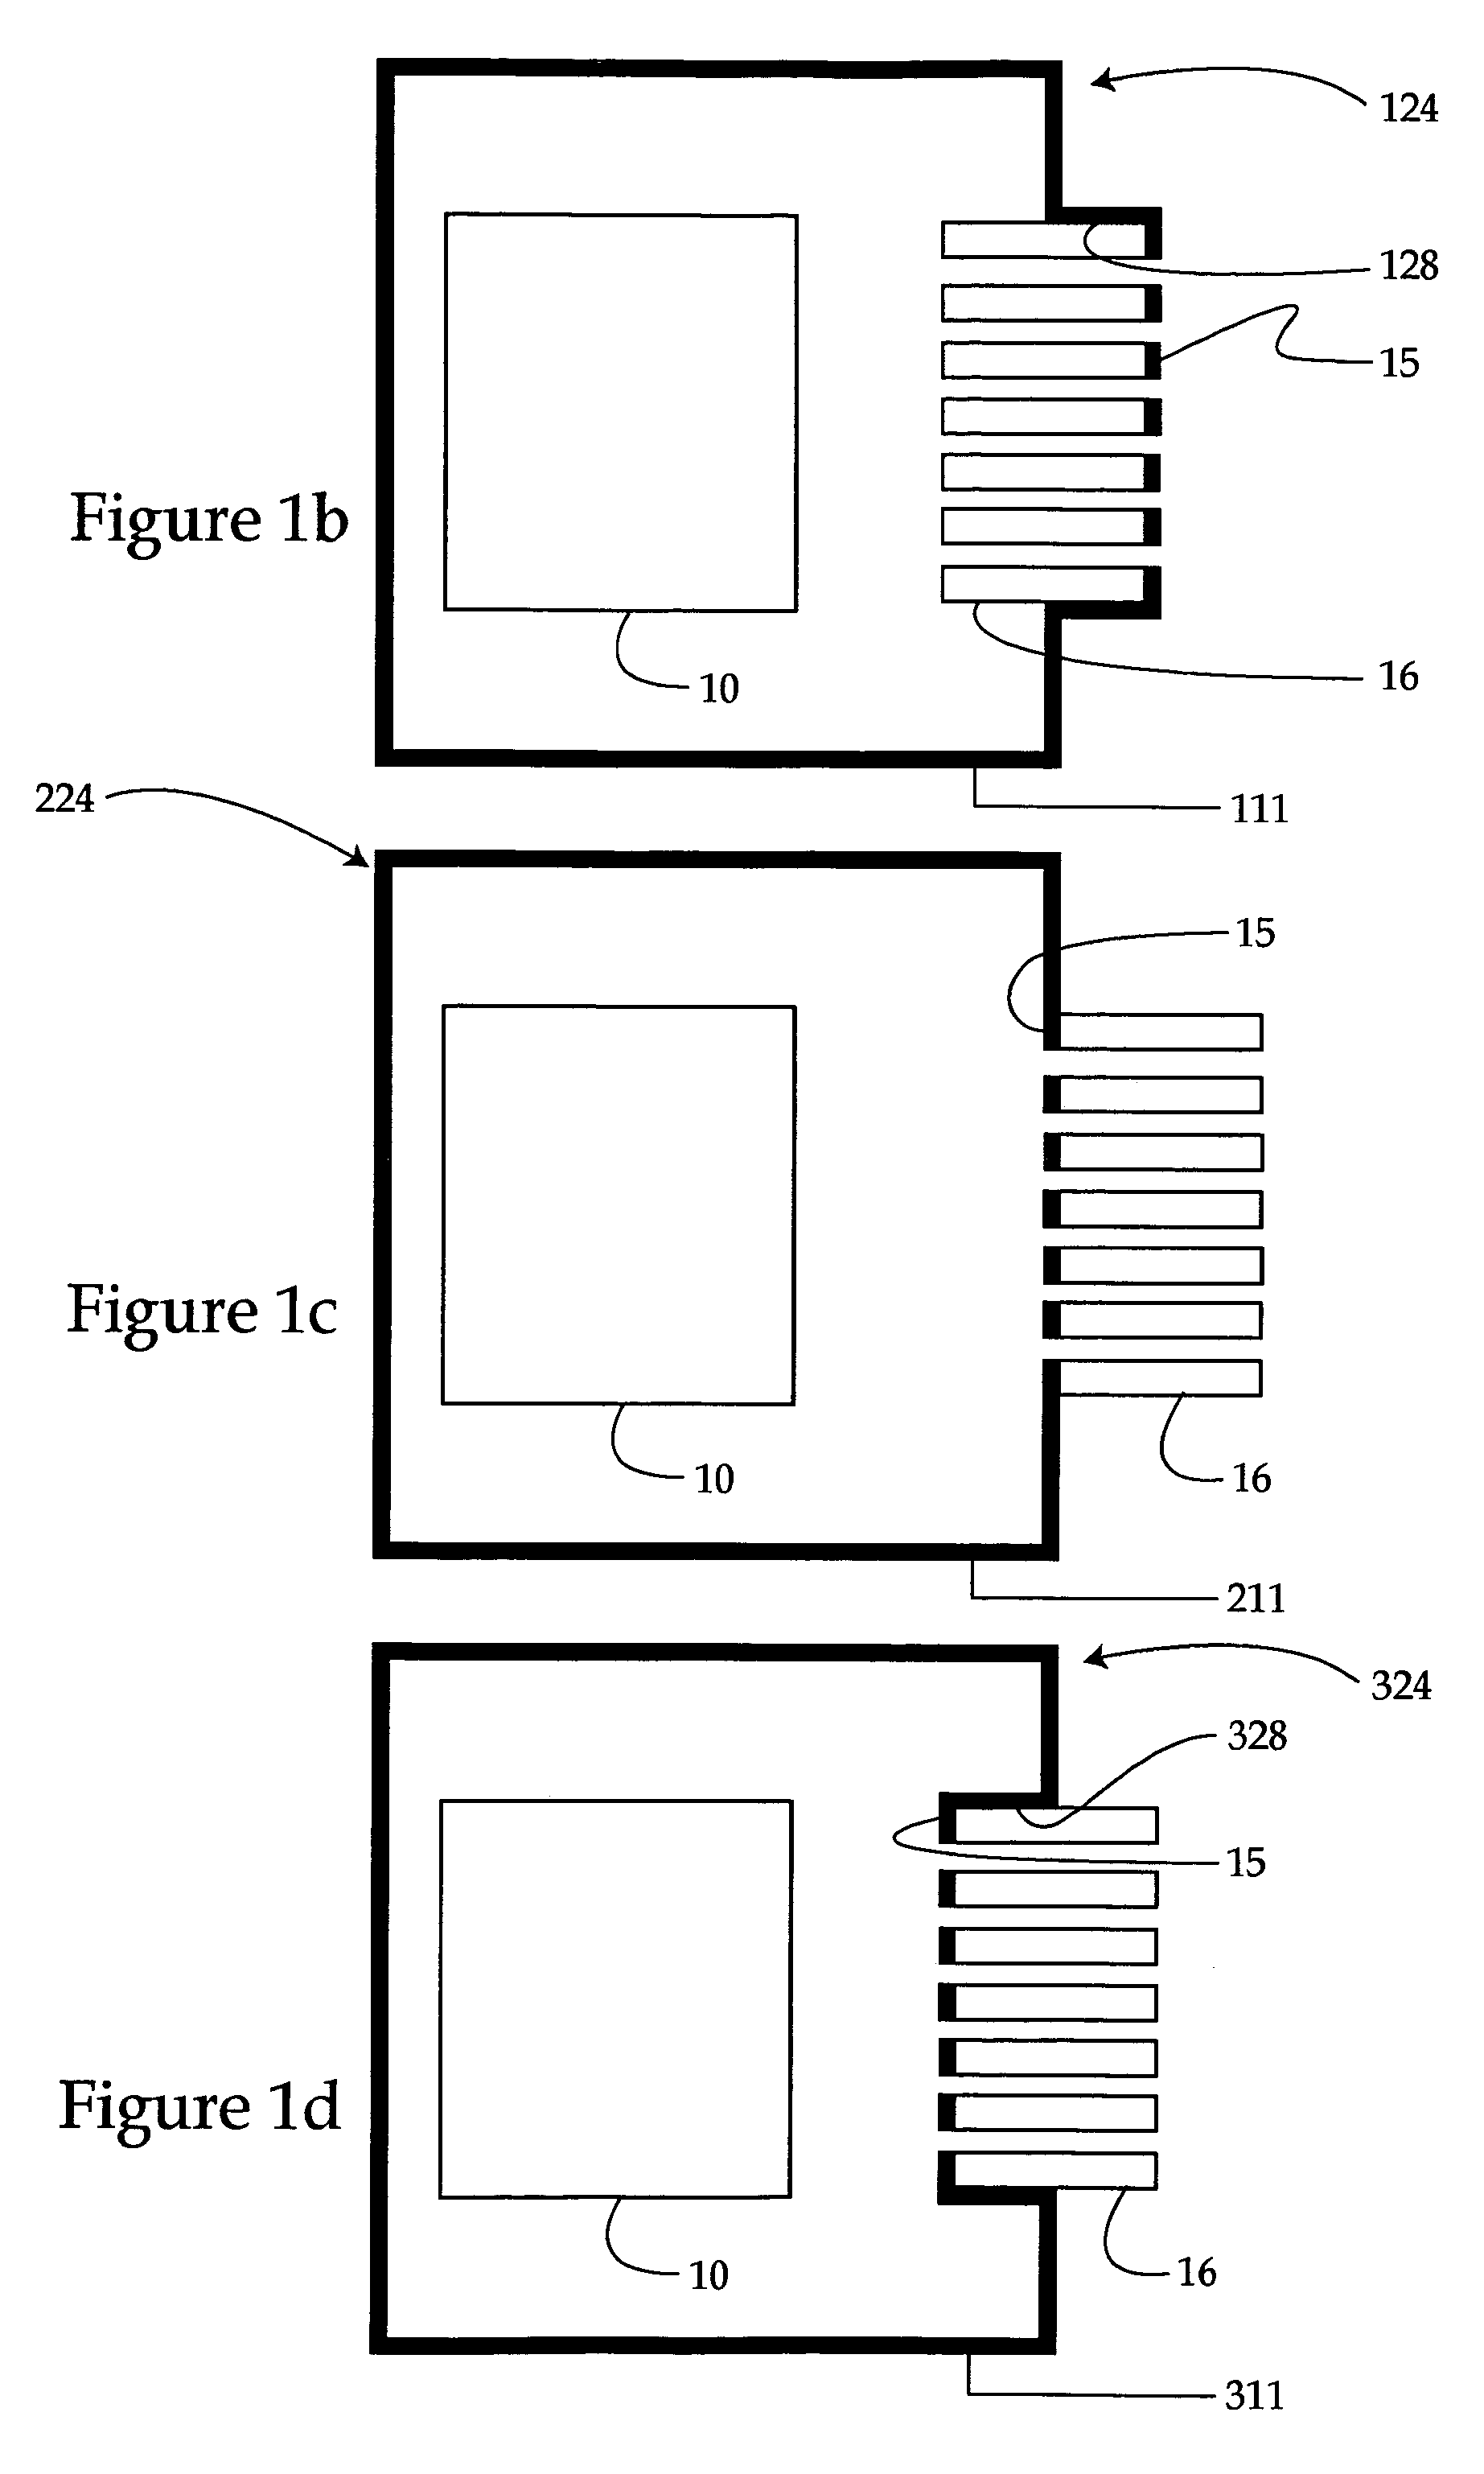 Machine housing component with acoustic media grille and method of attenuating machine noise